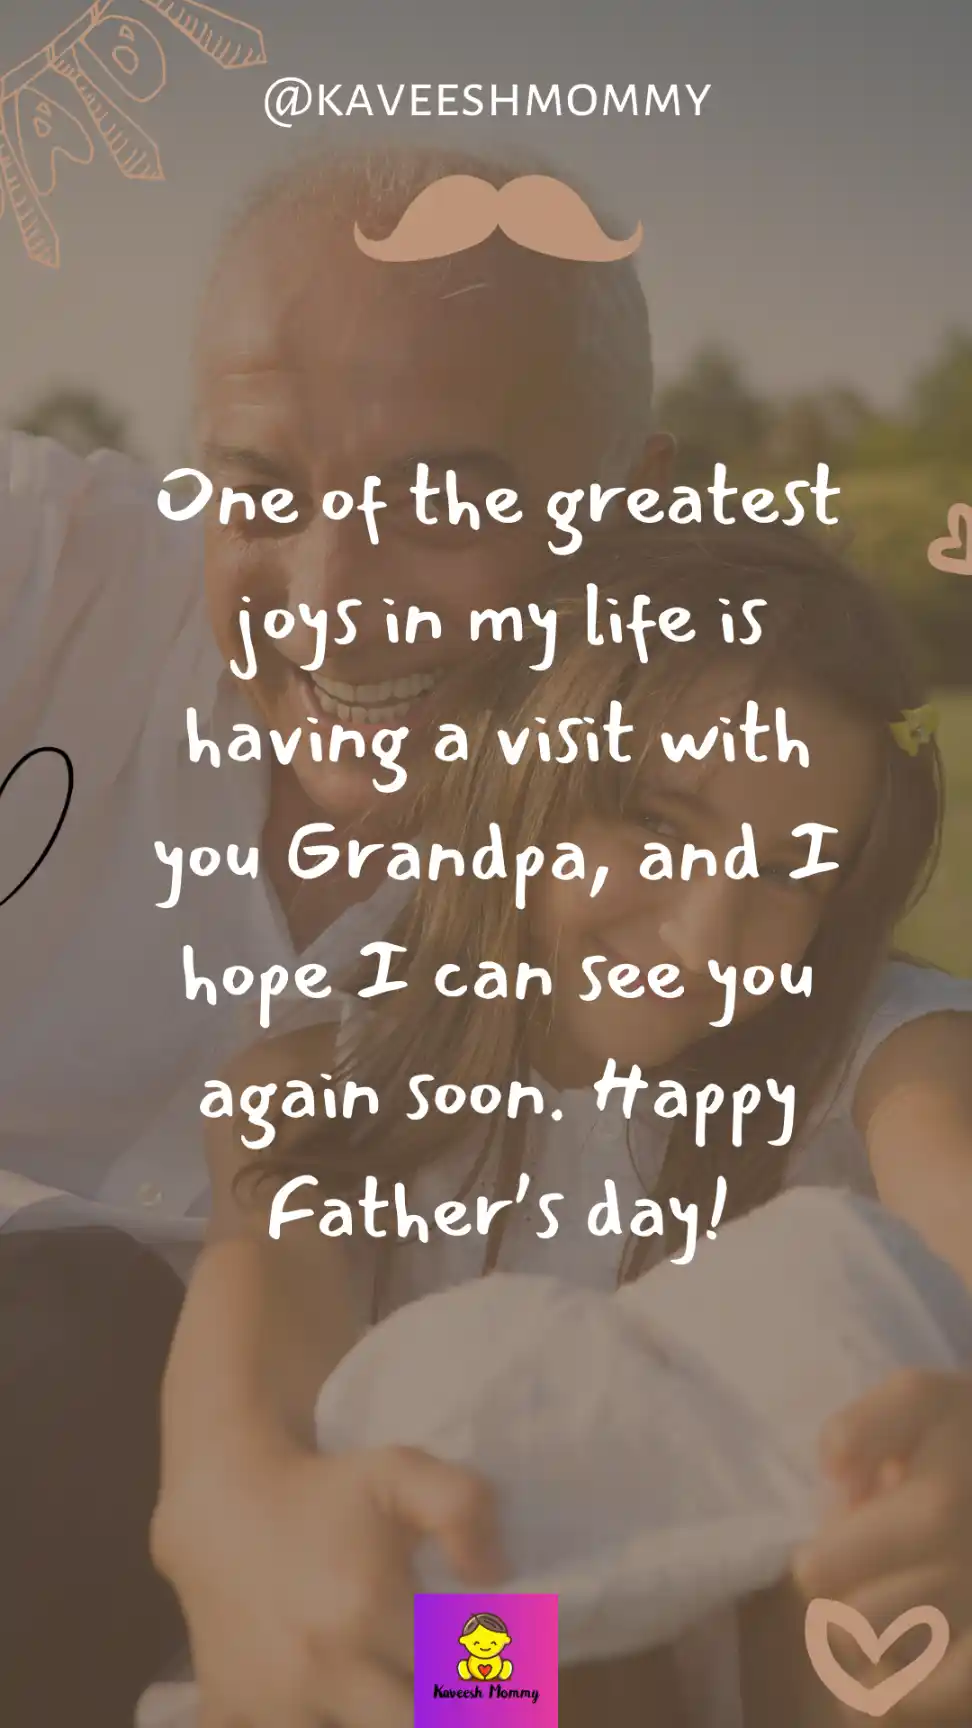 grandpa sayings for father's day-KAVEESH MOMMY 